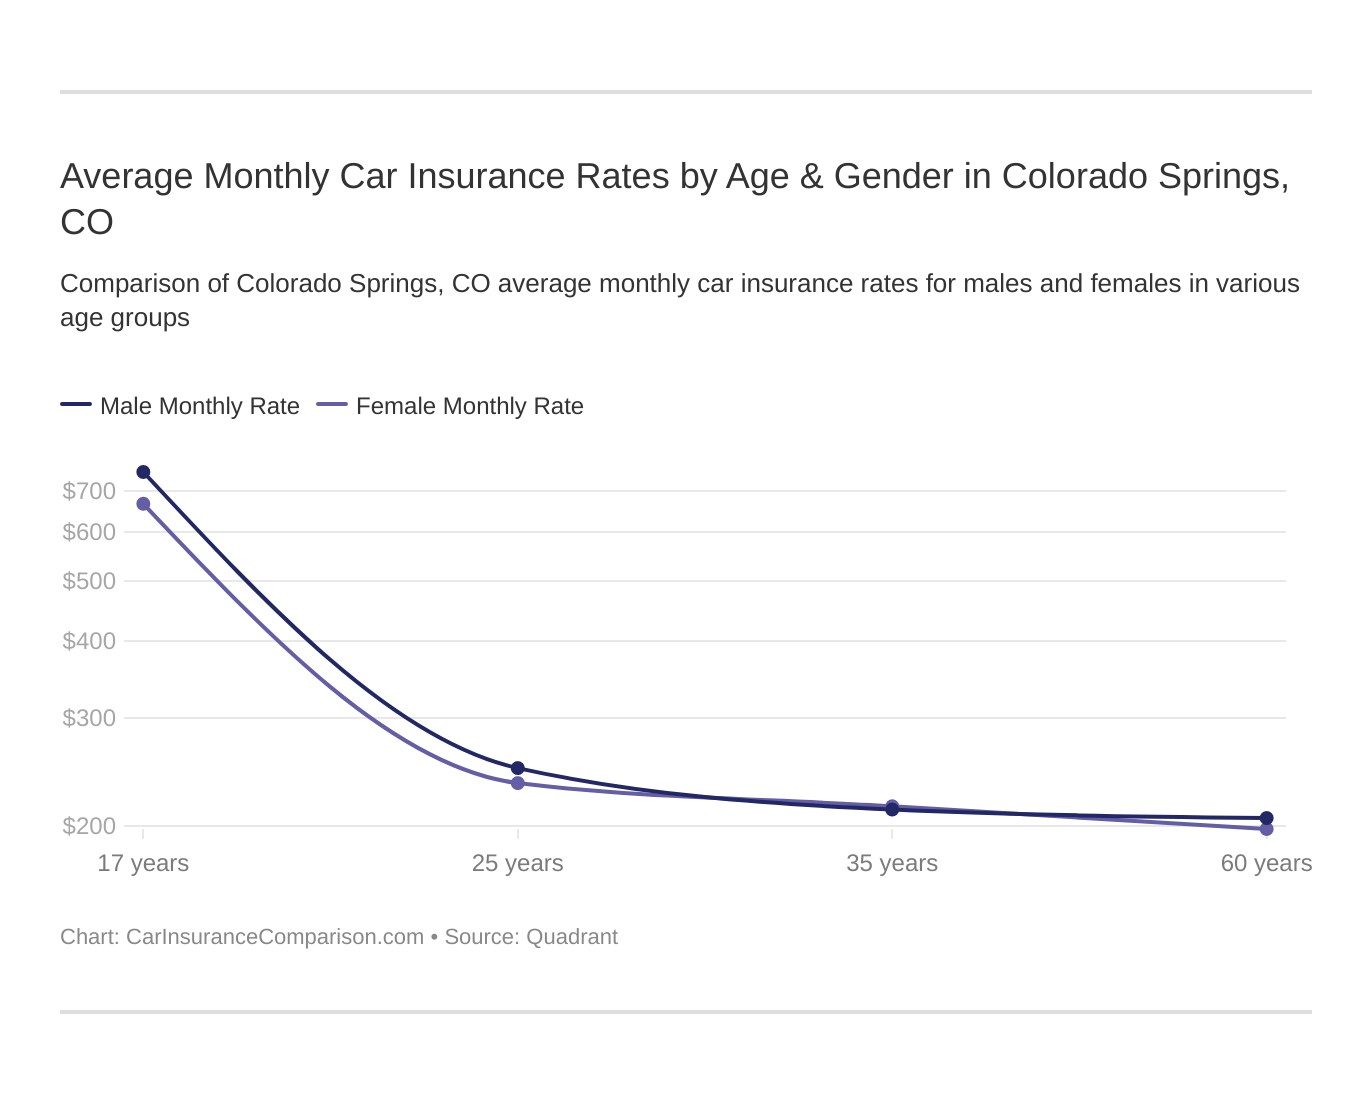 Average Monthly Car Insurance Rates by Age & Gender in Colorado Springs, CO